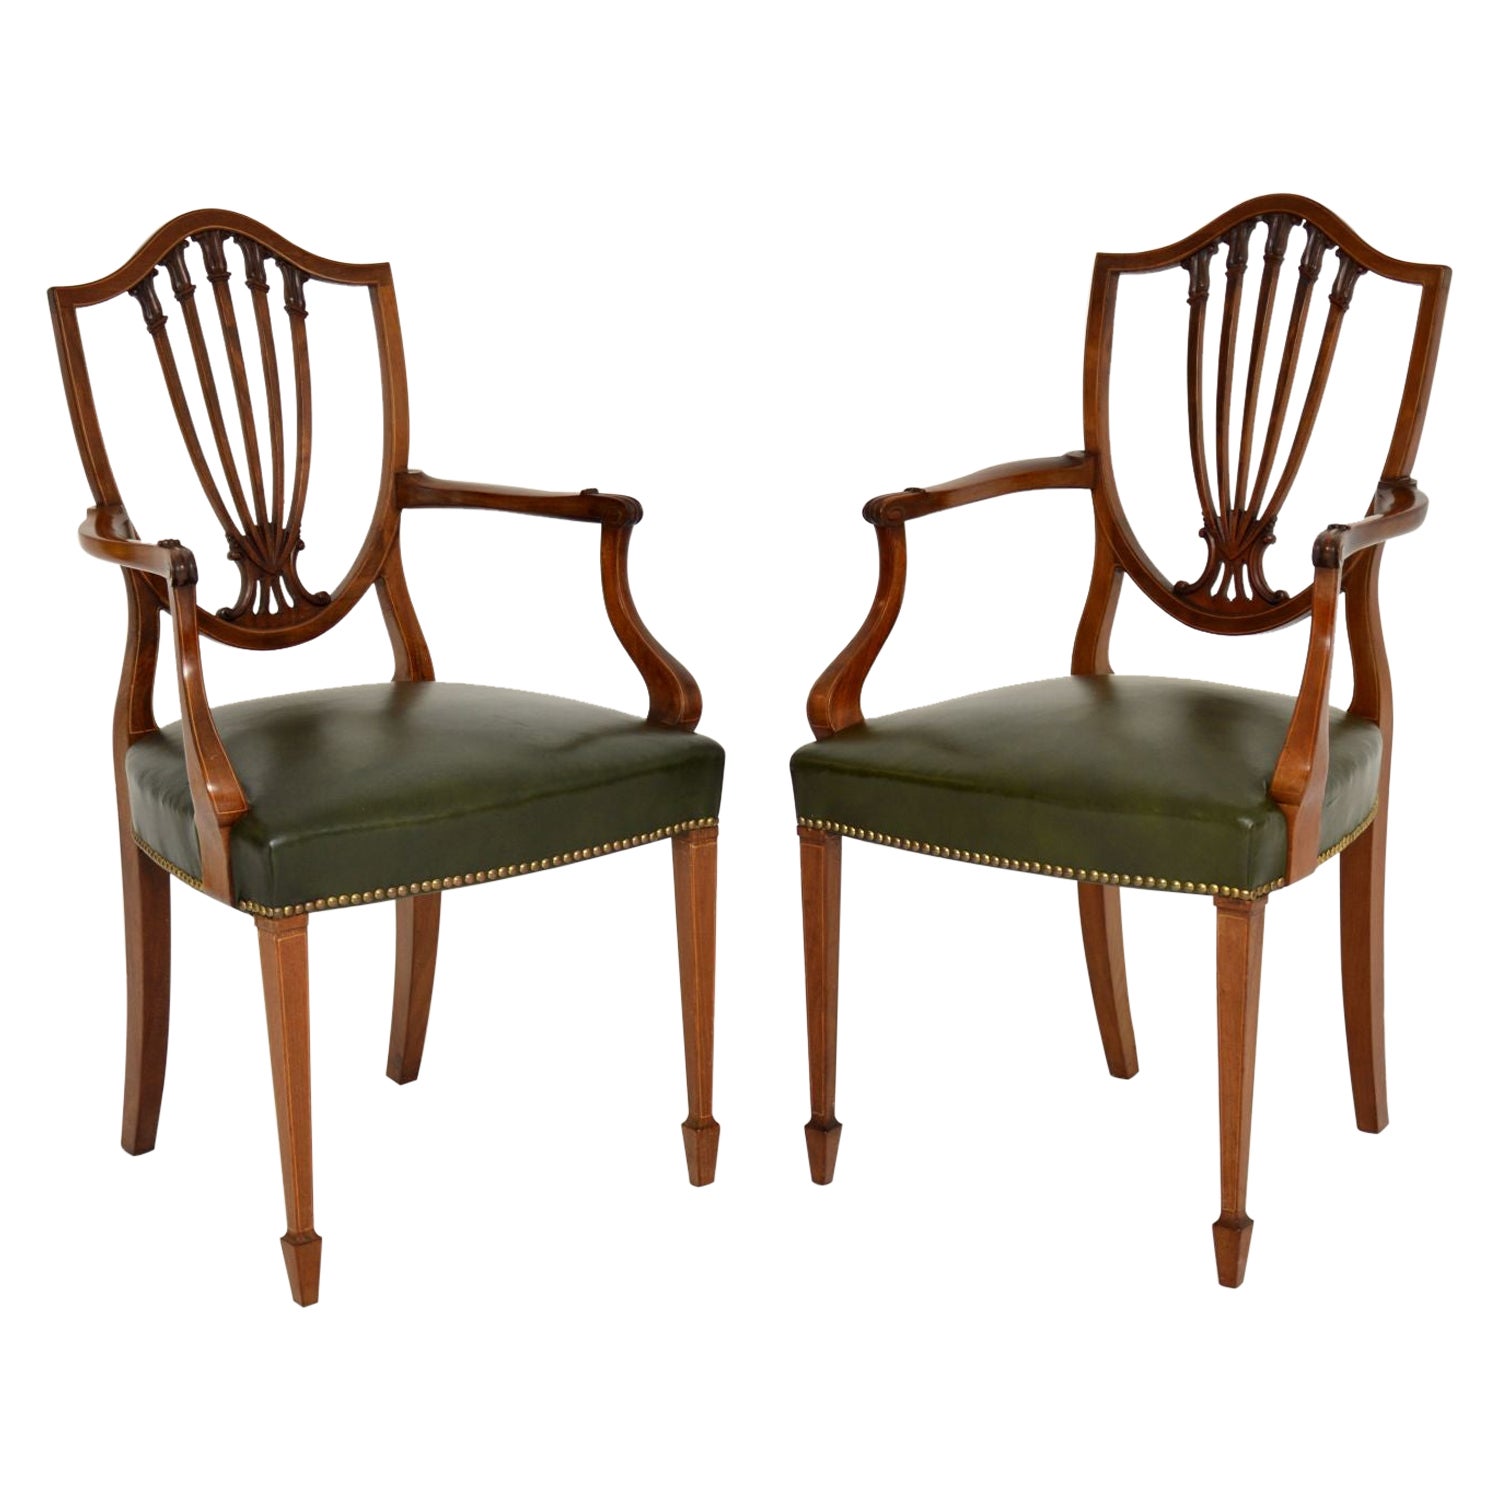 Pair of Antique Shield Back Carver Armchairs